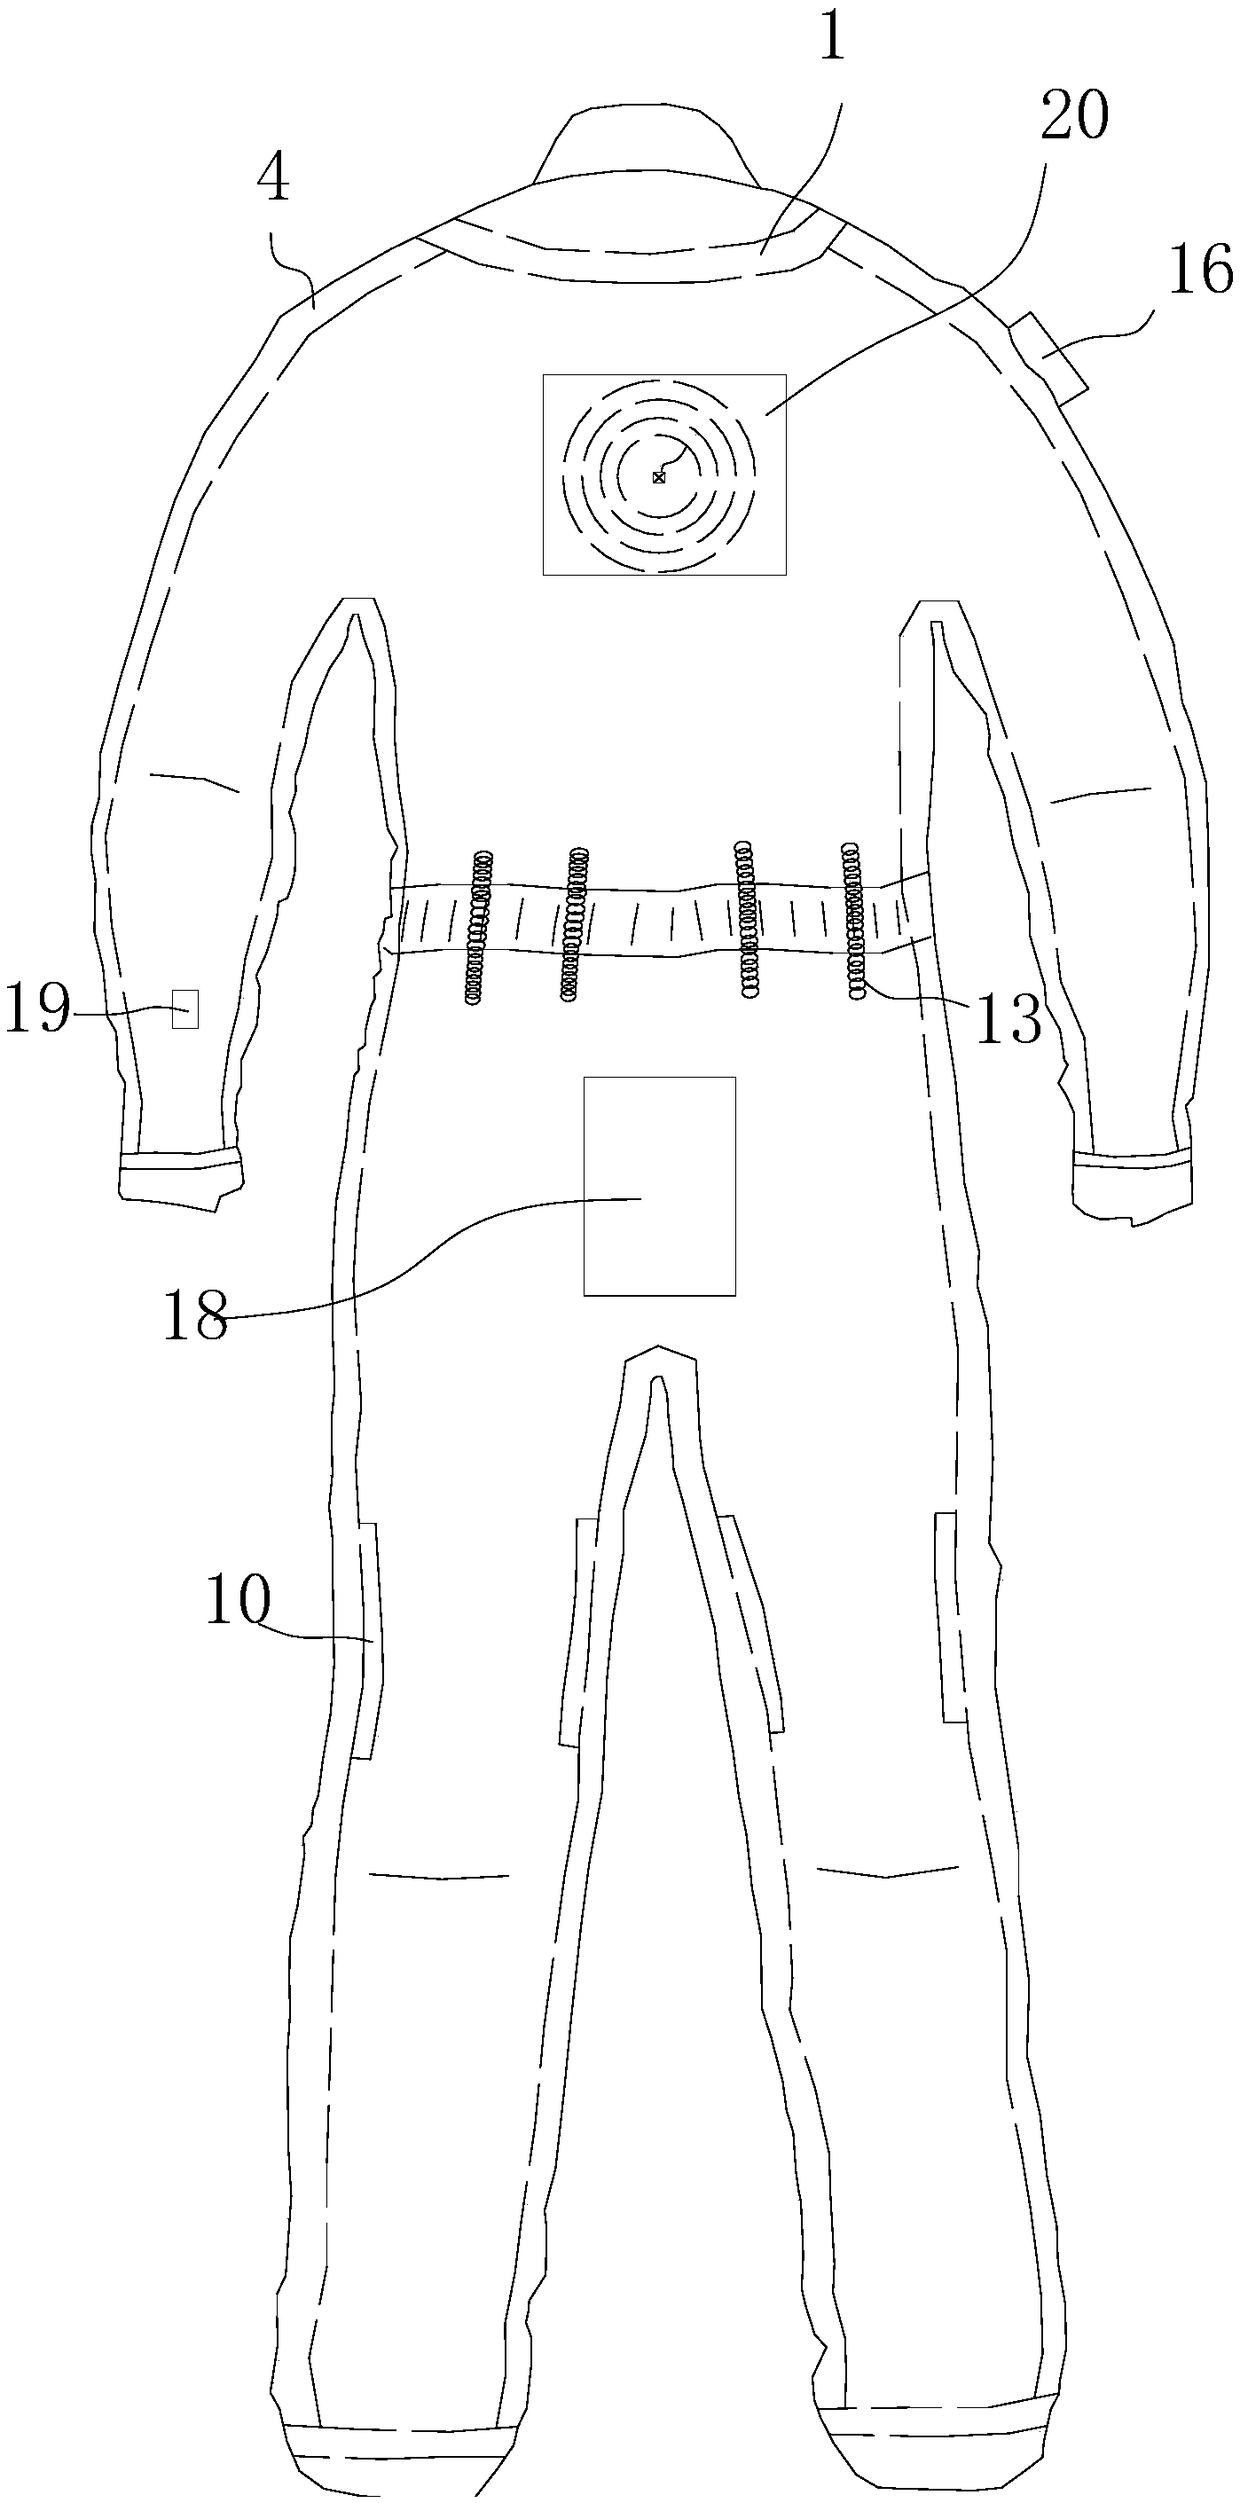 Climbing clothes capable of being used for injecting epinephrine